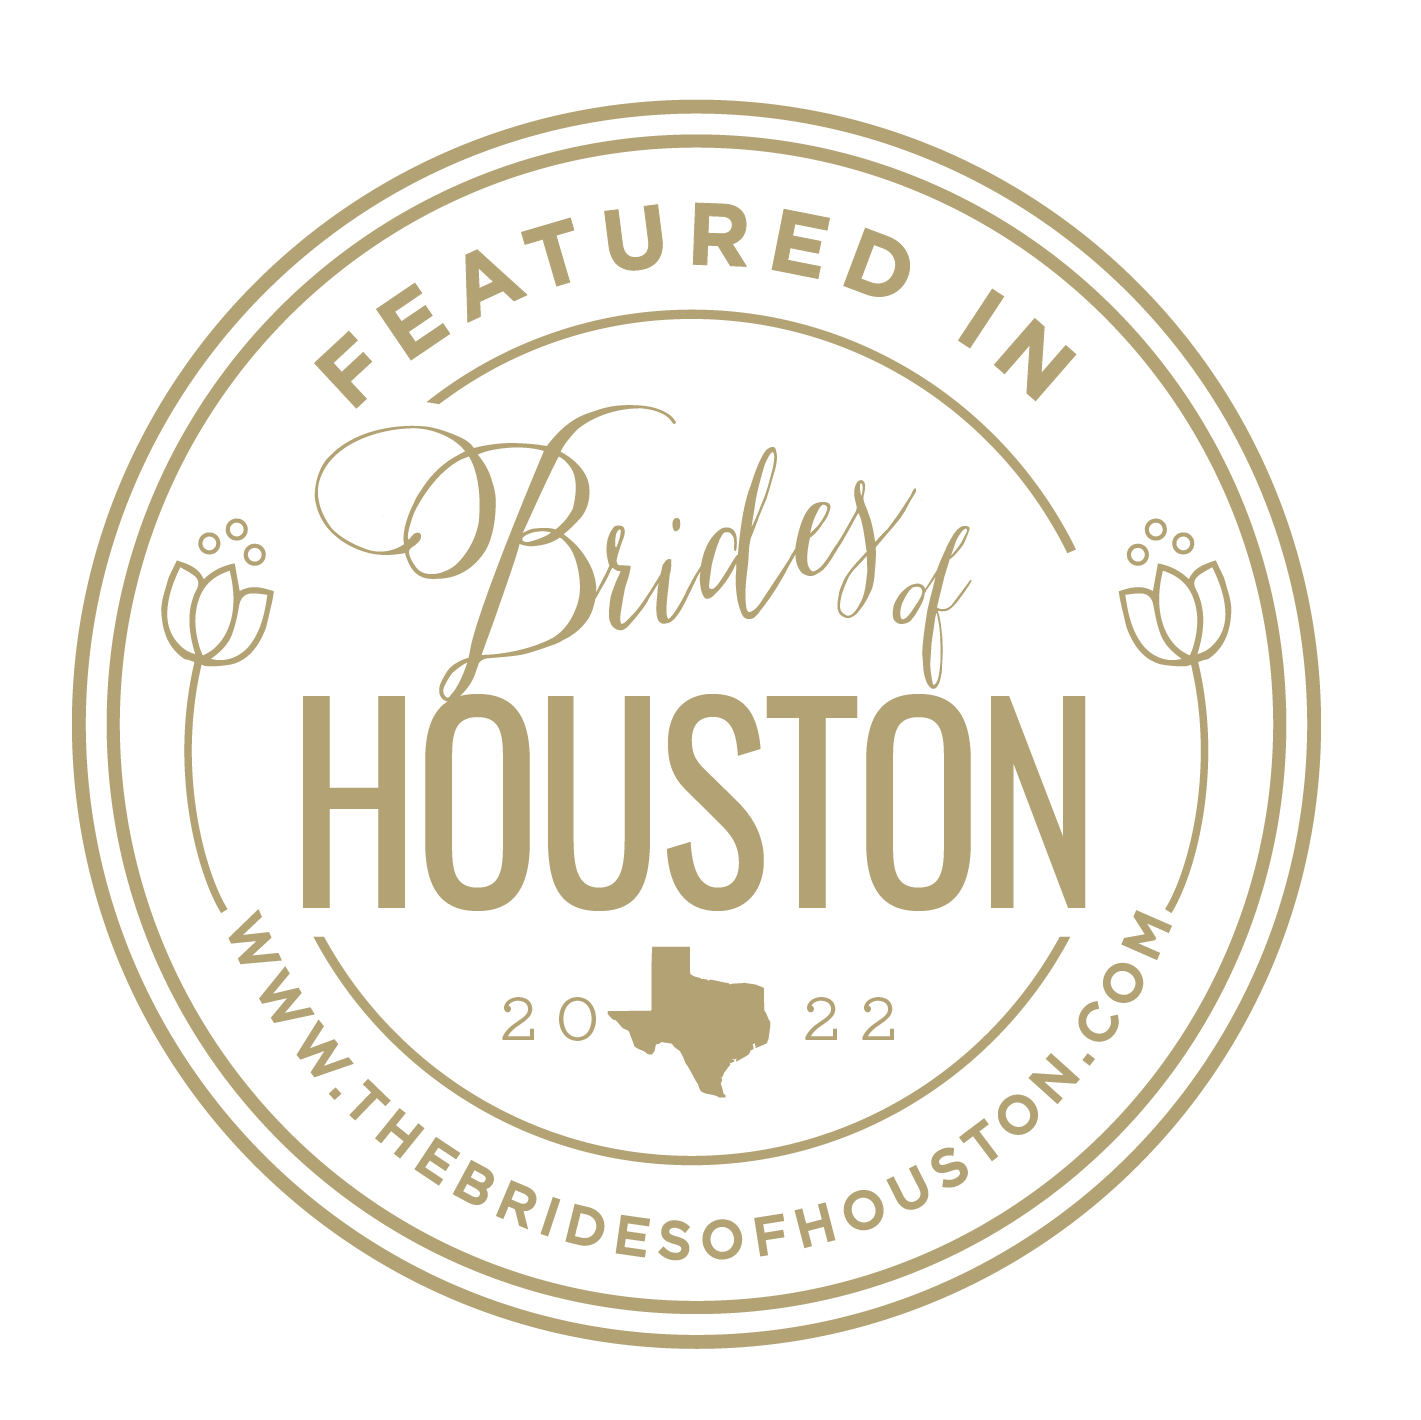 Featured on Wed Society Houston a Houston Wedding Resource